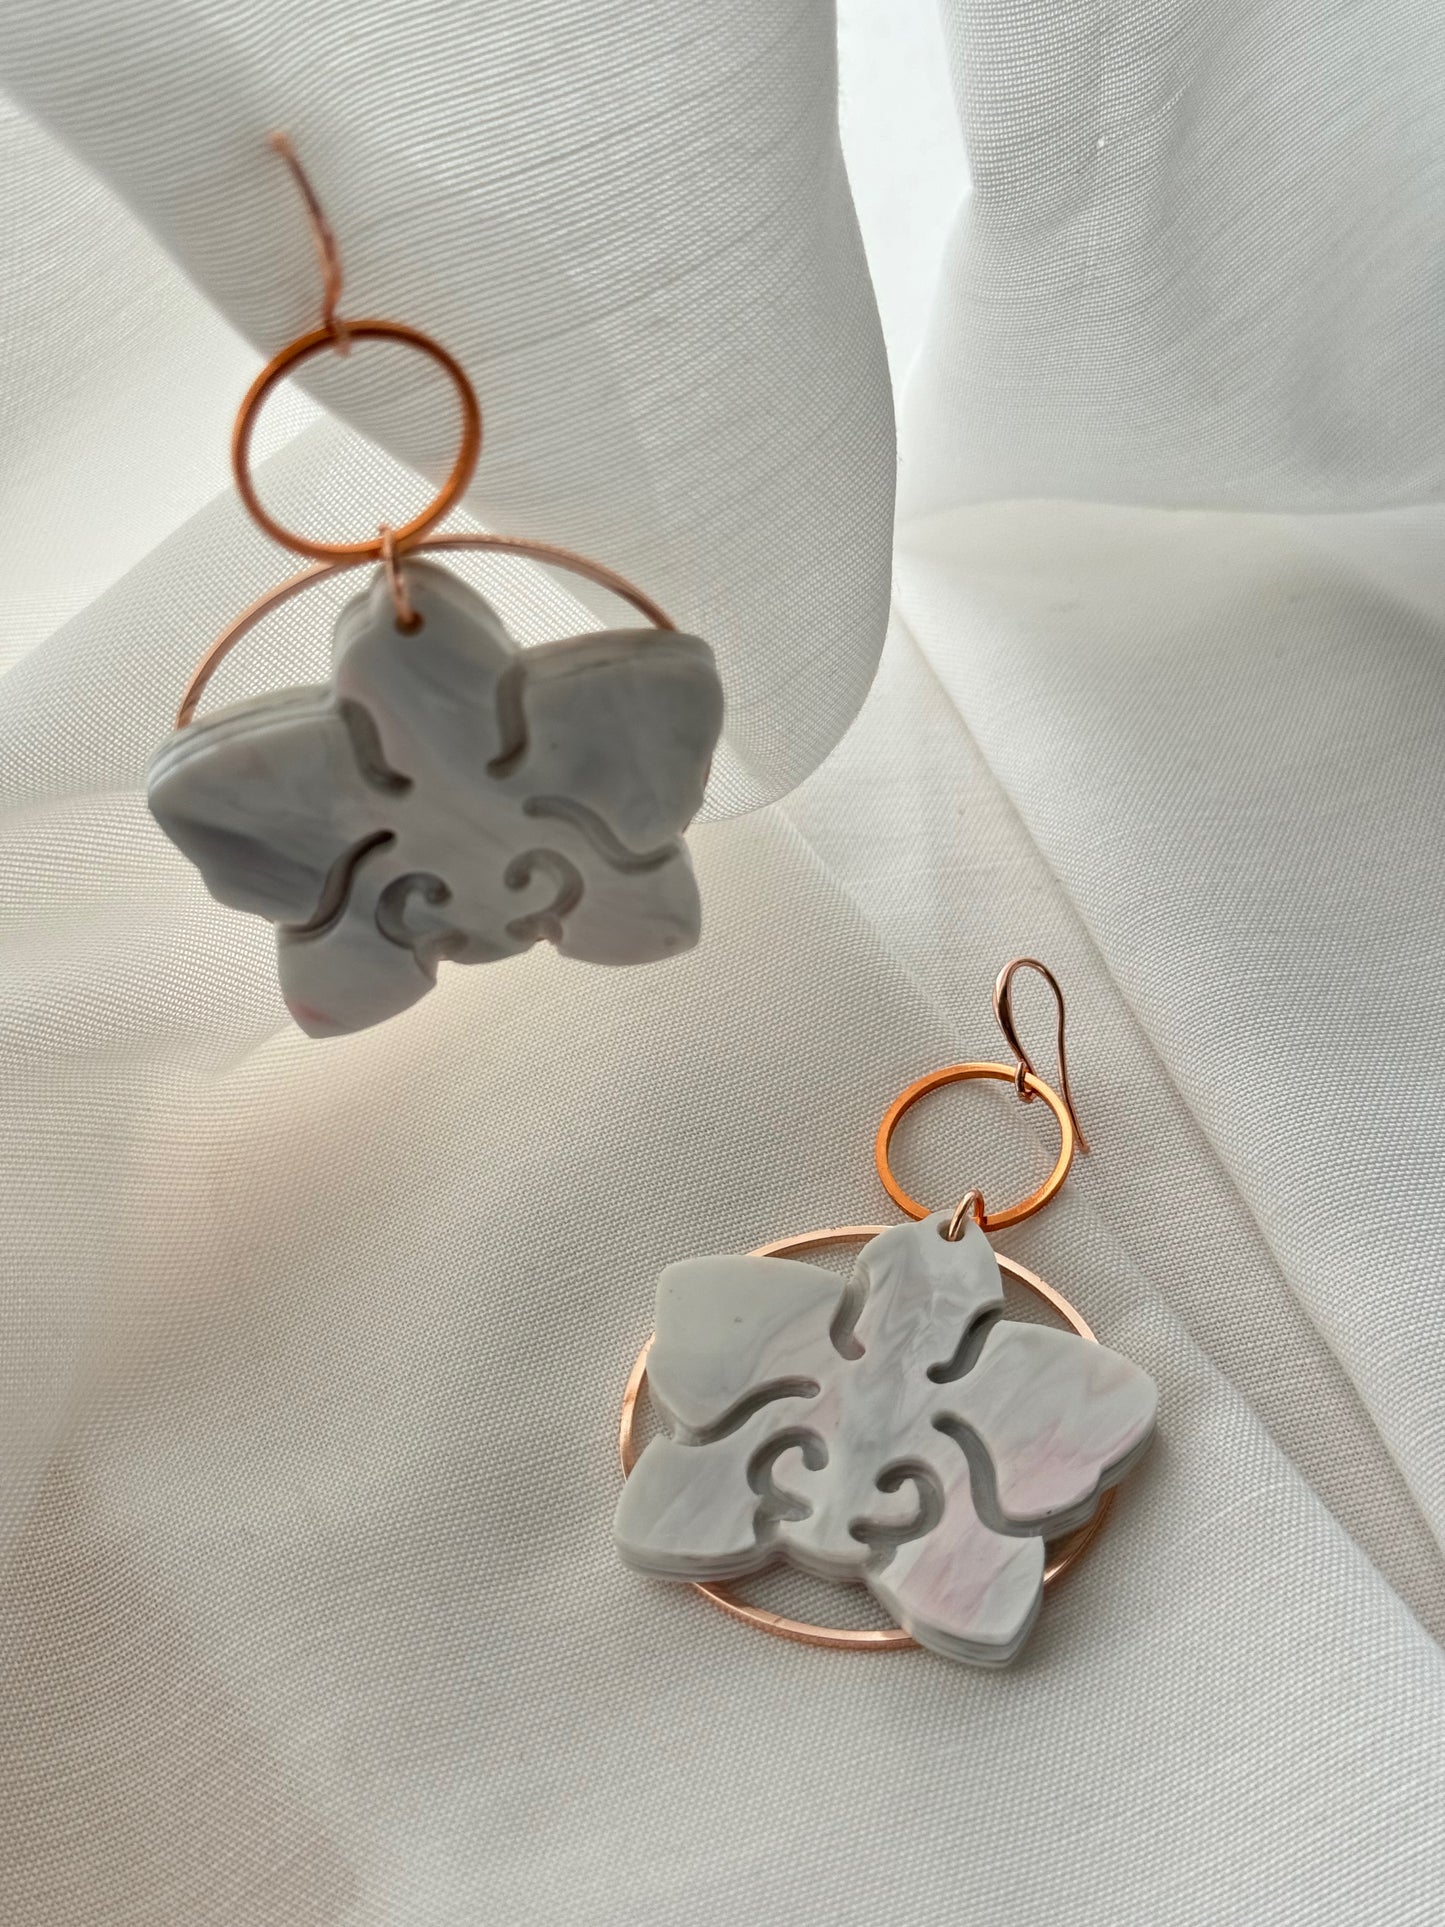 Orchid Earrings- Grey & Pale Pink Marble